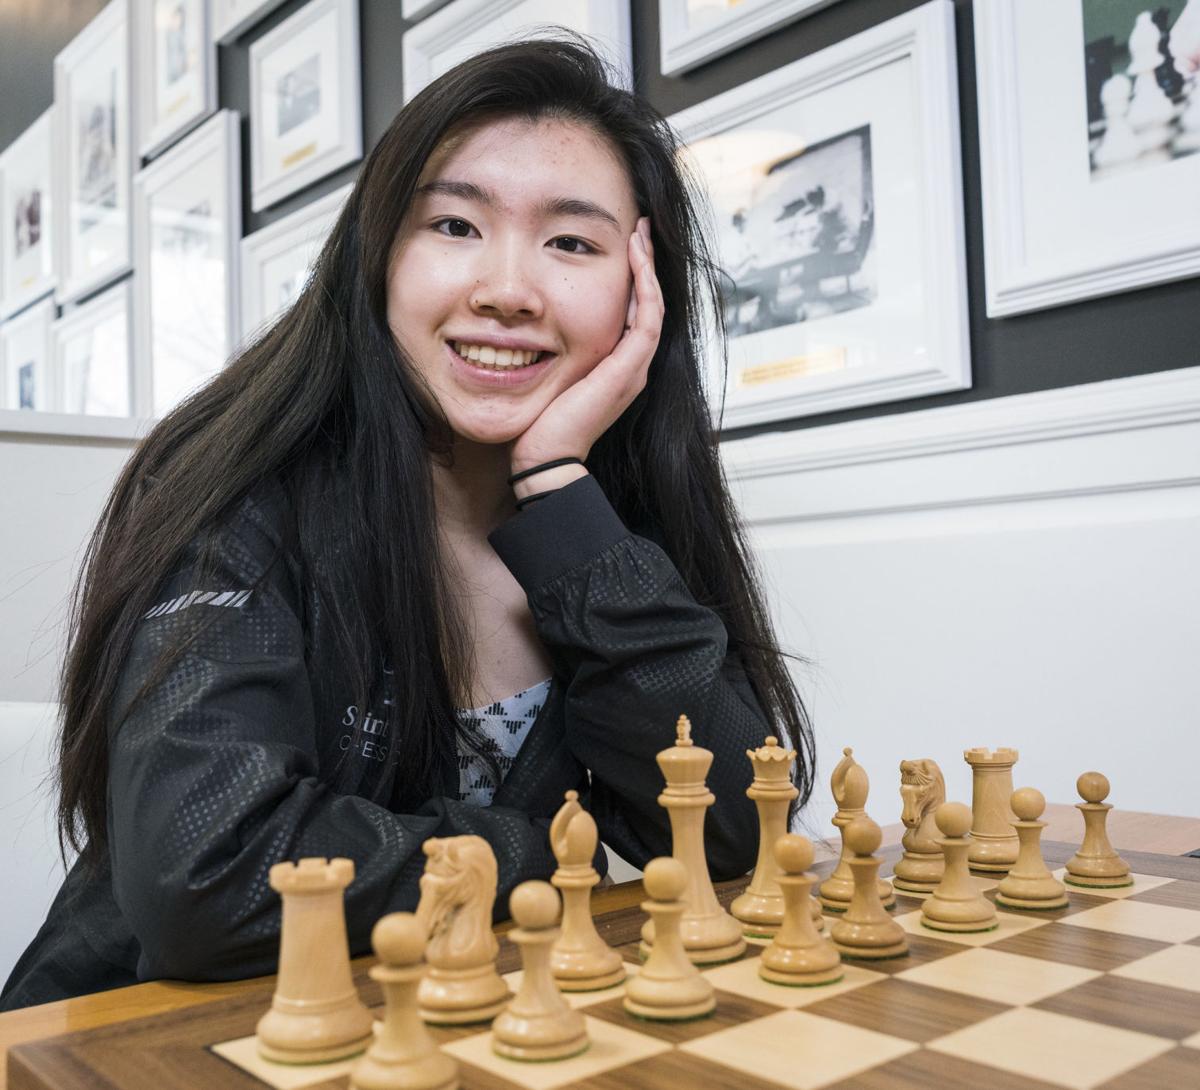 She's a Chess Champion Who Can Barely See the Board - The New York Times